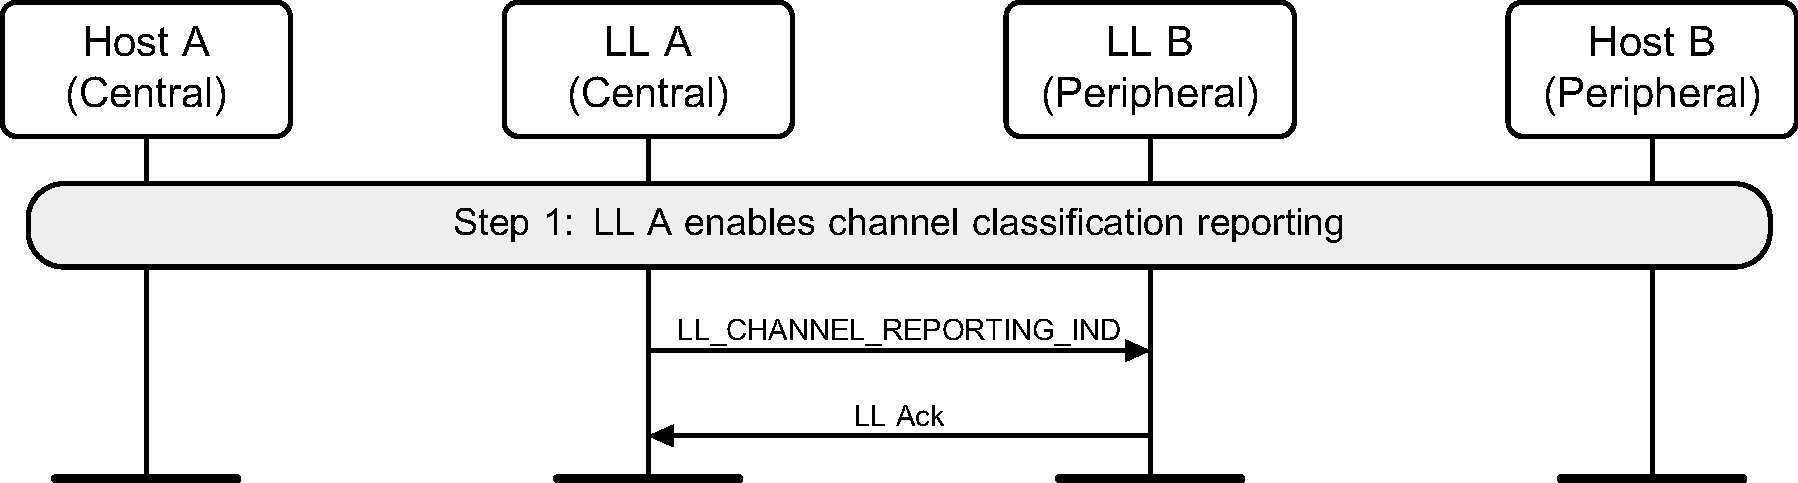 Central requests the Peripheral to enable reporting of channel classification information